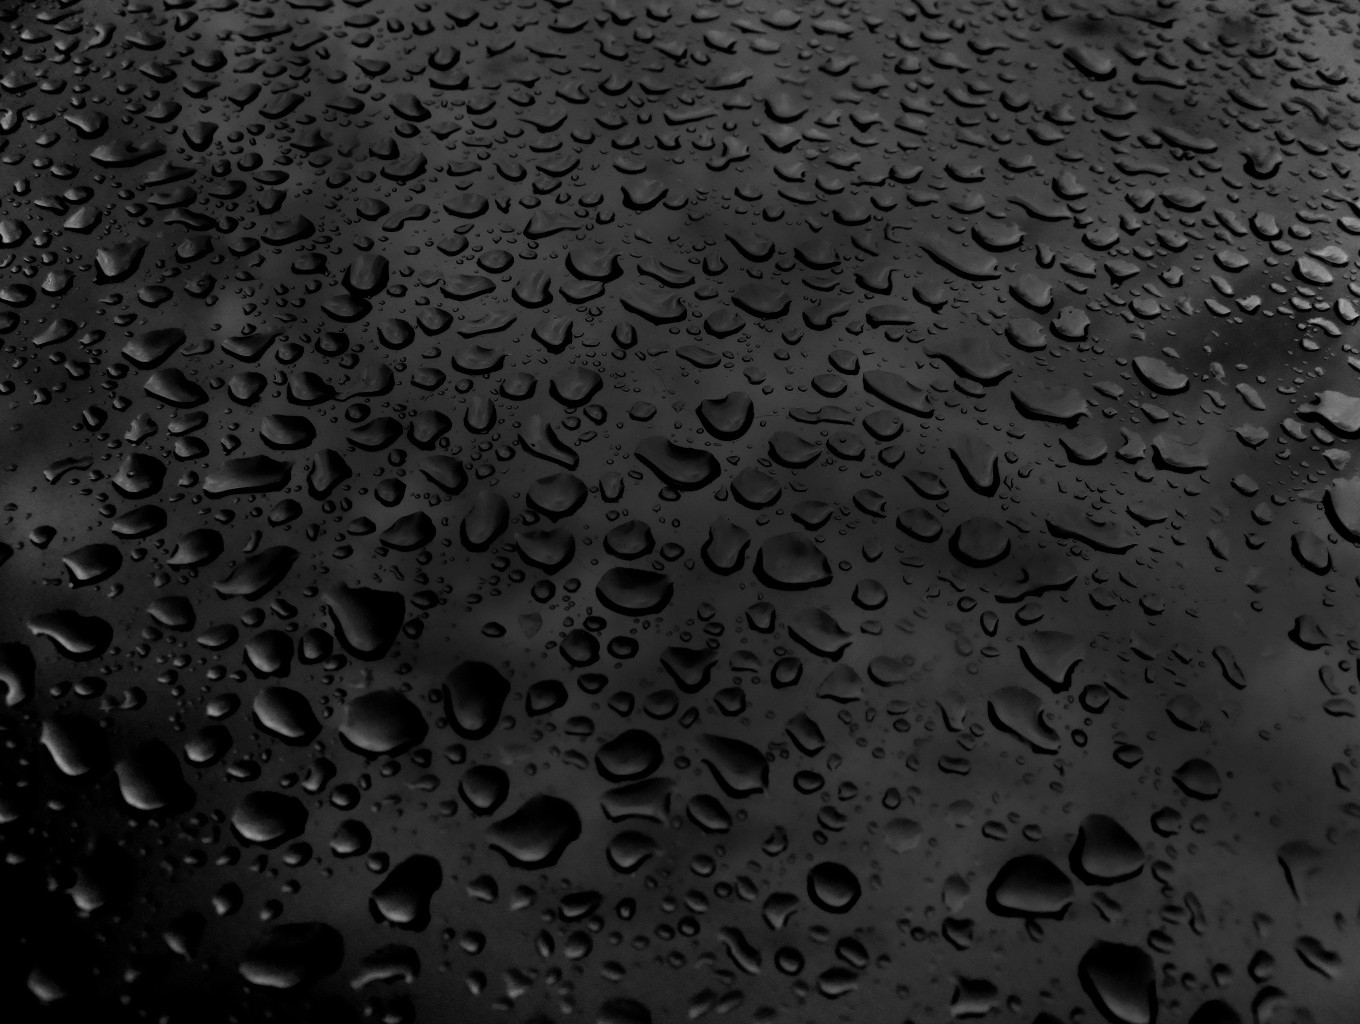 Raining Water Droplets Wallpapers